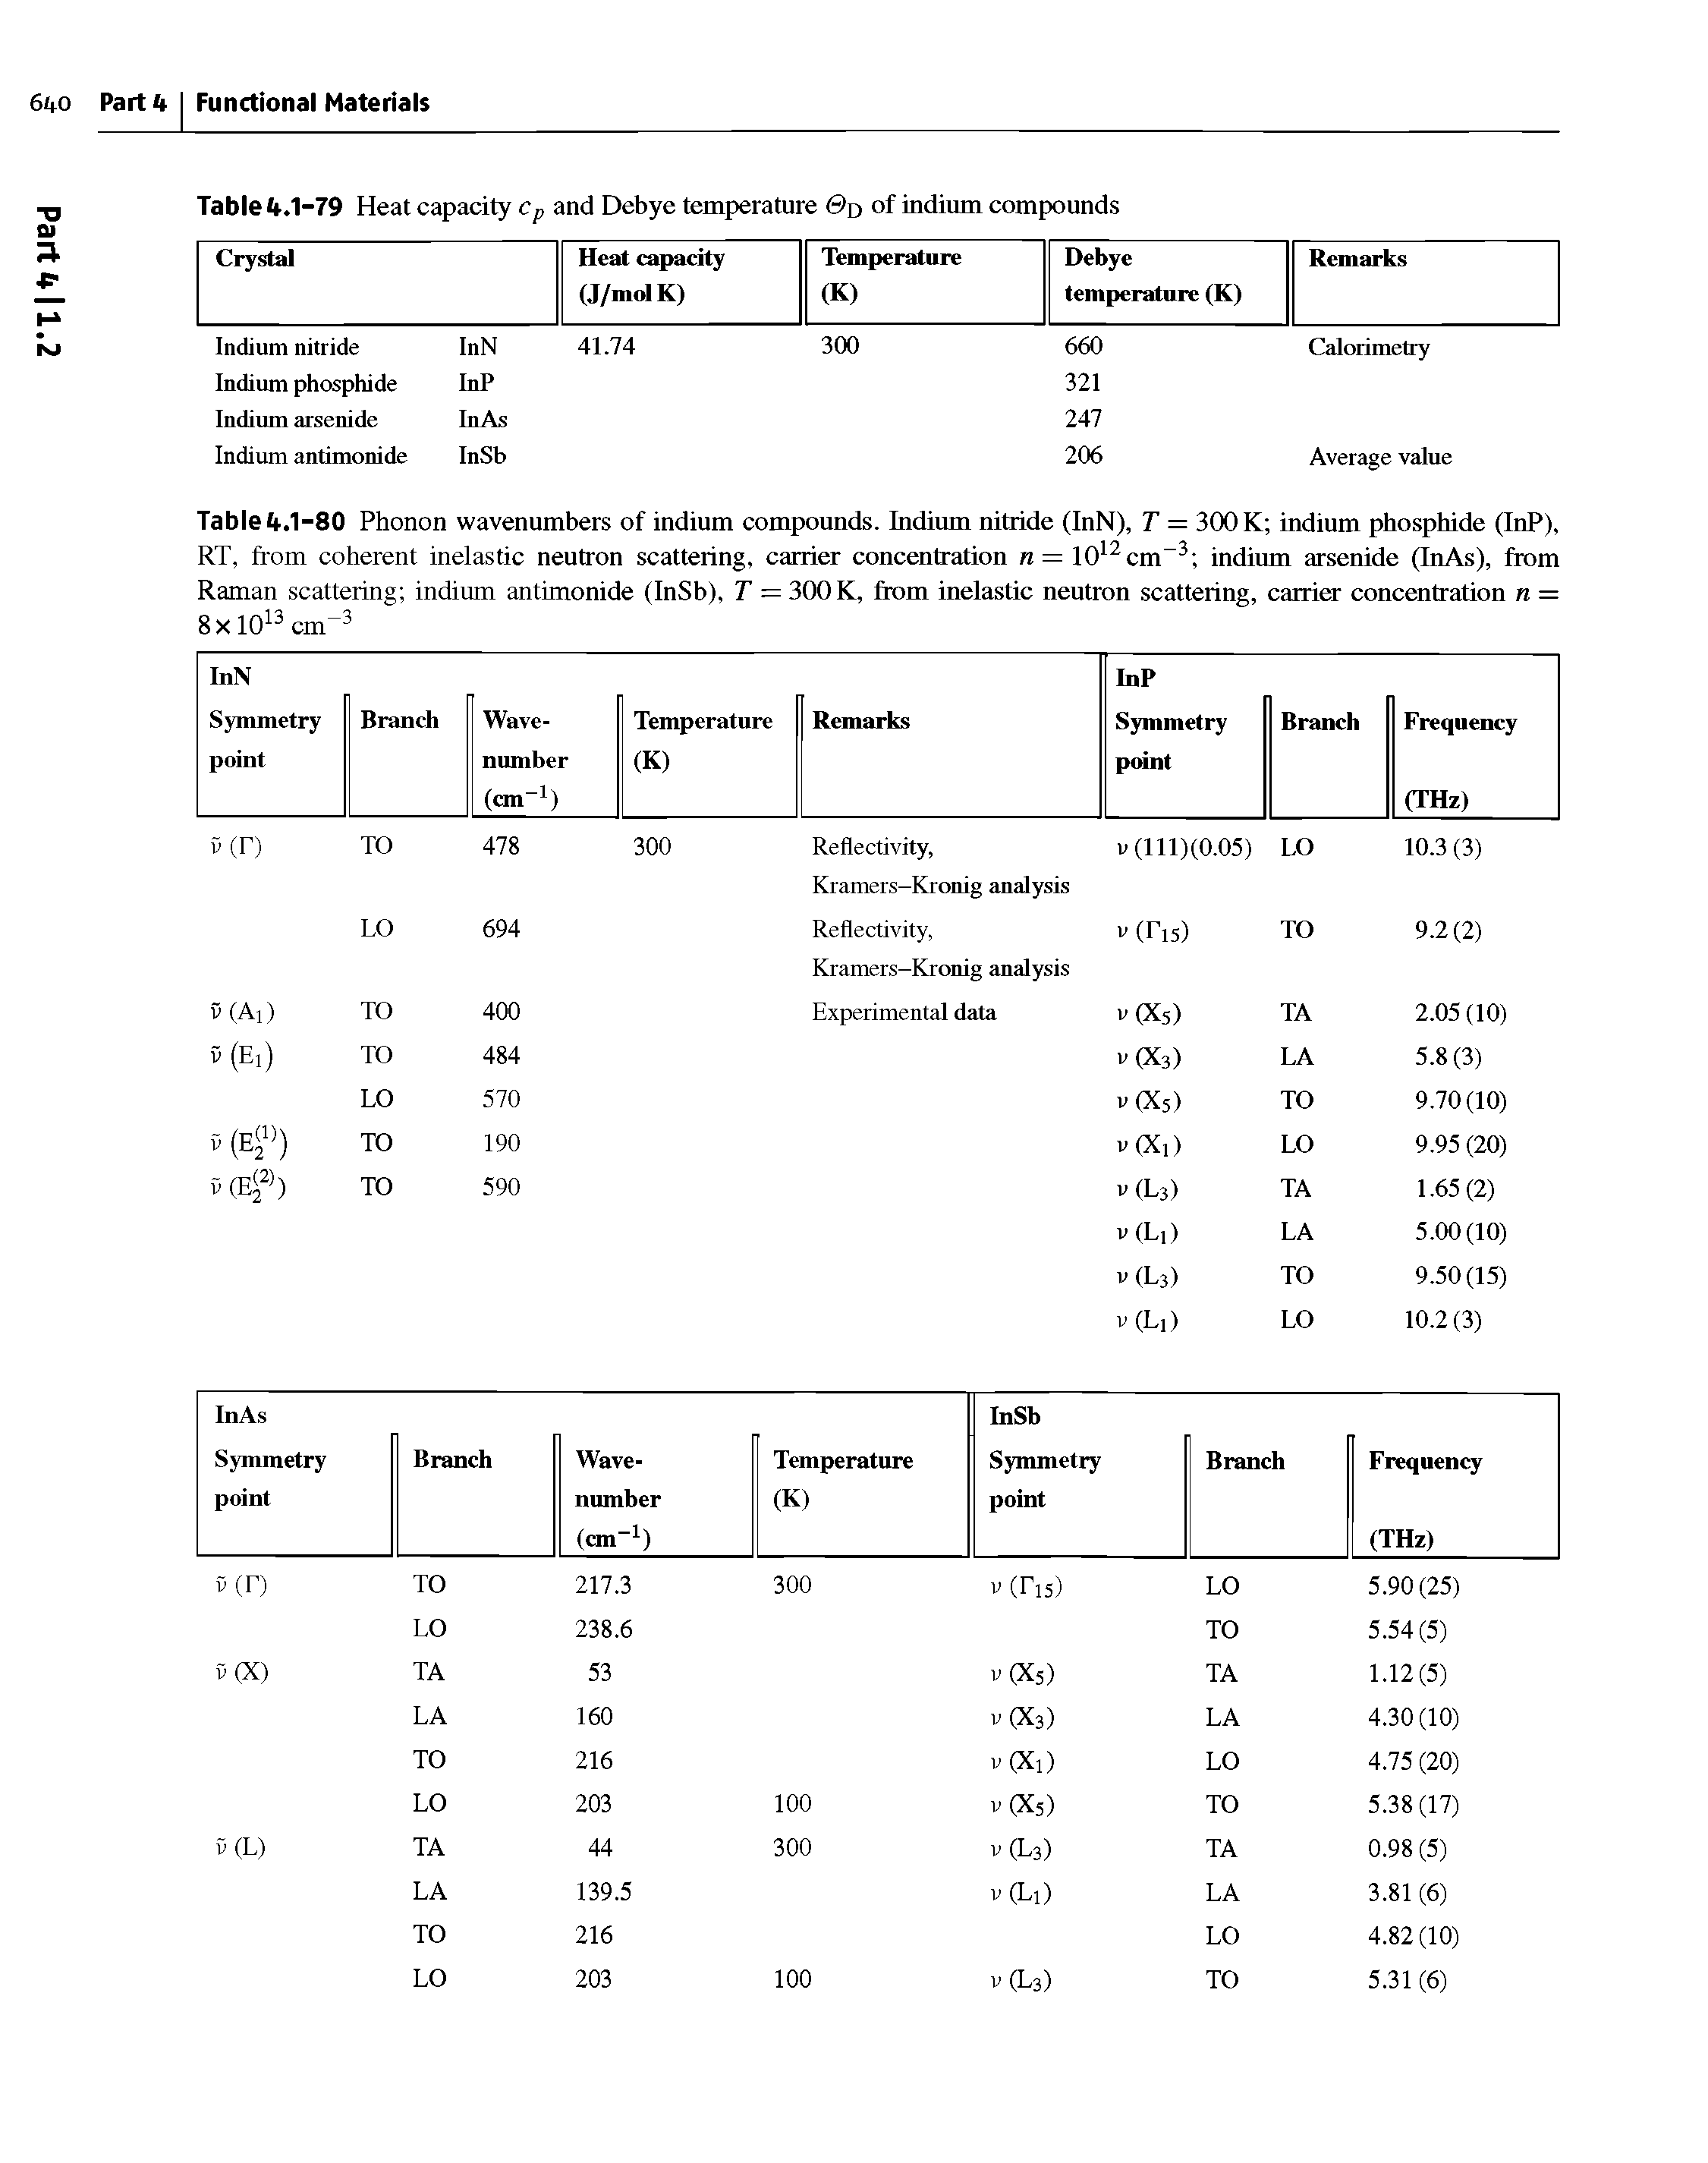 Table 4.1-80 Phonon wavenumbers of indium compouuds. Indium nitride (InN), T = 300 K indium phosphide (InP), RT, from coherent inelastic neutron scattering, carrier concentration n = 10 em indium arsenide (InAs), from Raman scattering indium antimonide (InSb), T = 300 K, from inelastic neutron scattering, carrier concentration n = SxlO cm ...